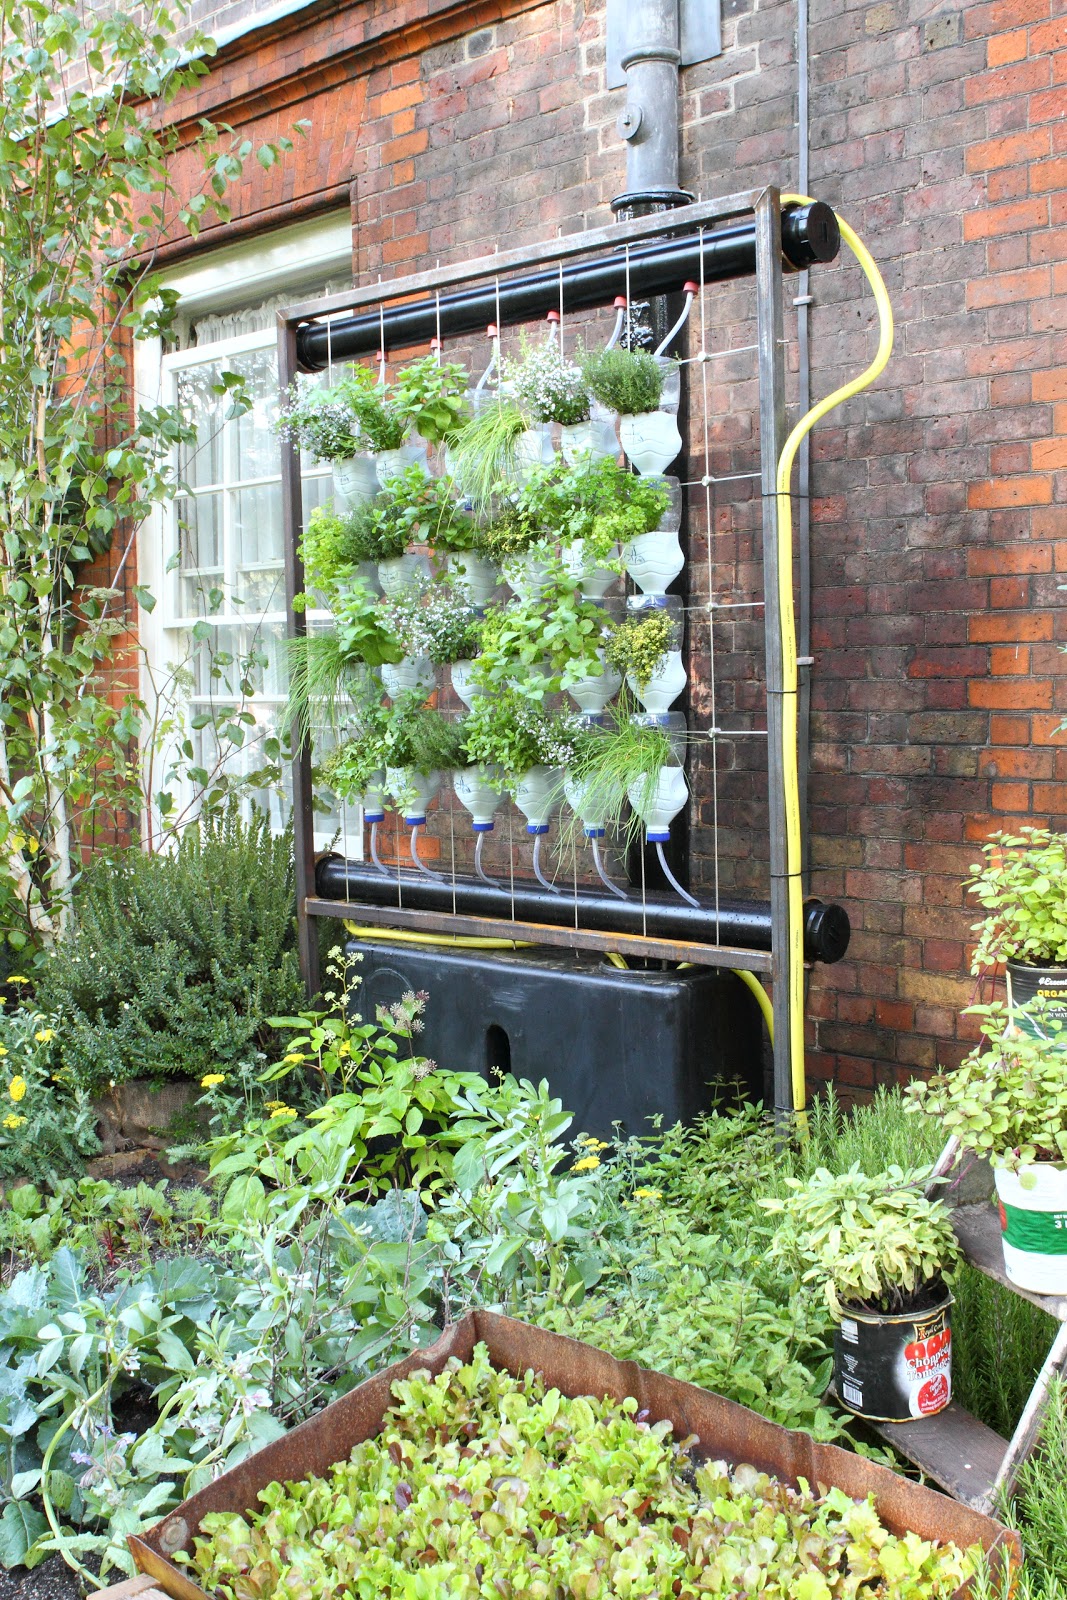 This garden featured a vertical hydroponic system made with old ...